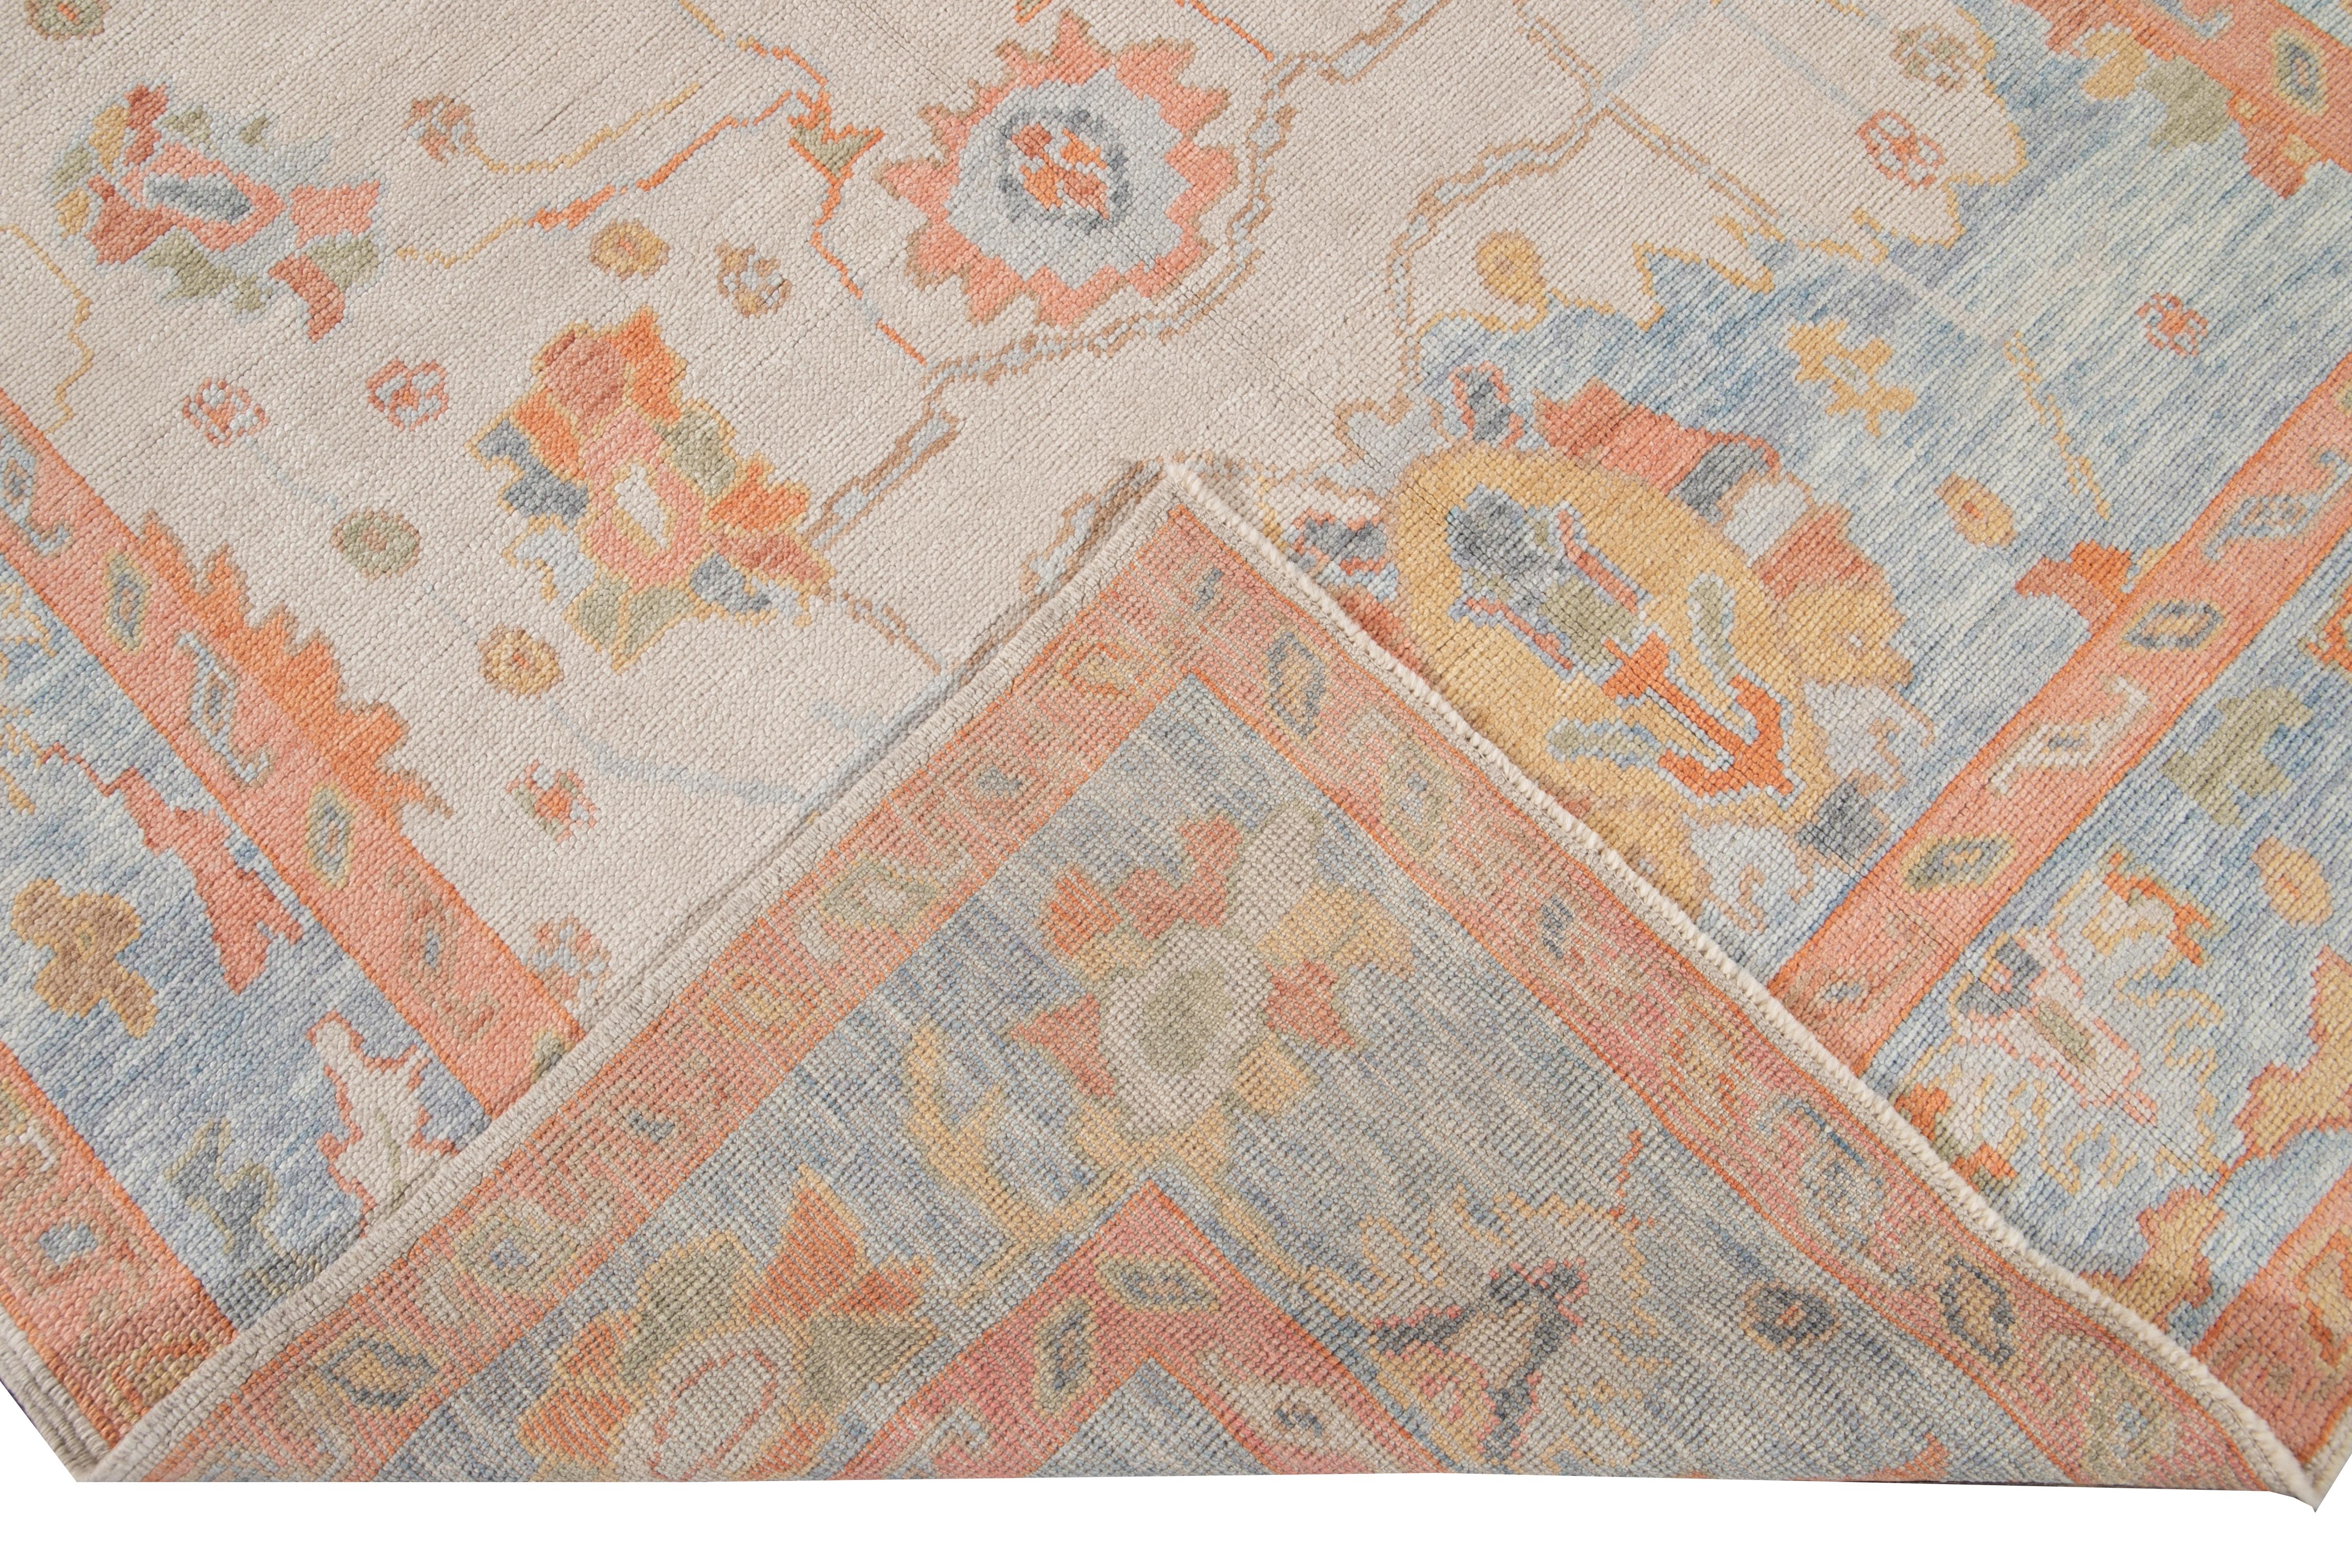 Beautiful modern Oushak hand knotted wool rug with a beige field. This Oushak rug has a blue and orange frame and accents of orange, green, and peach all-over a gorgeous geometric floral design.

This rug measures: 6'3